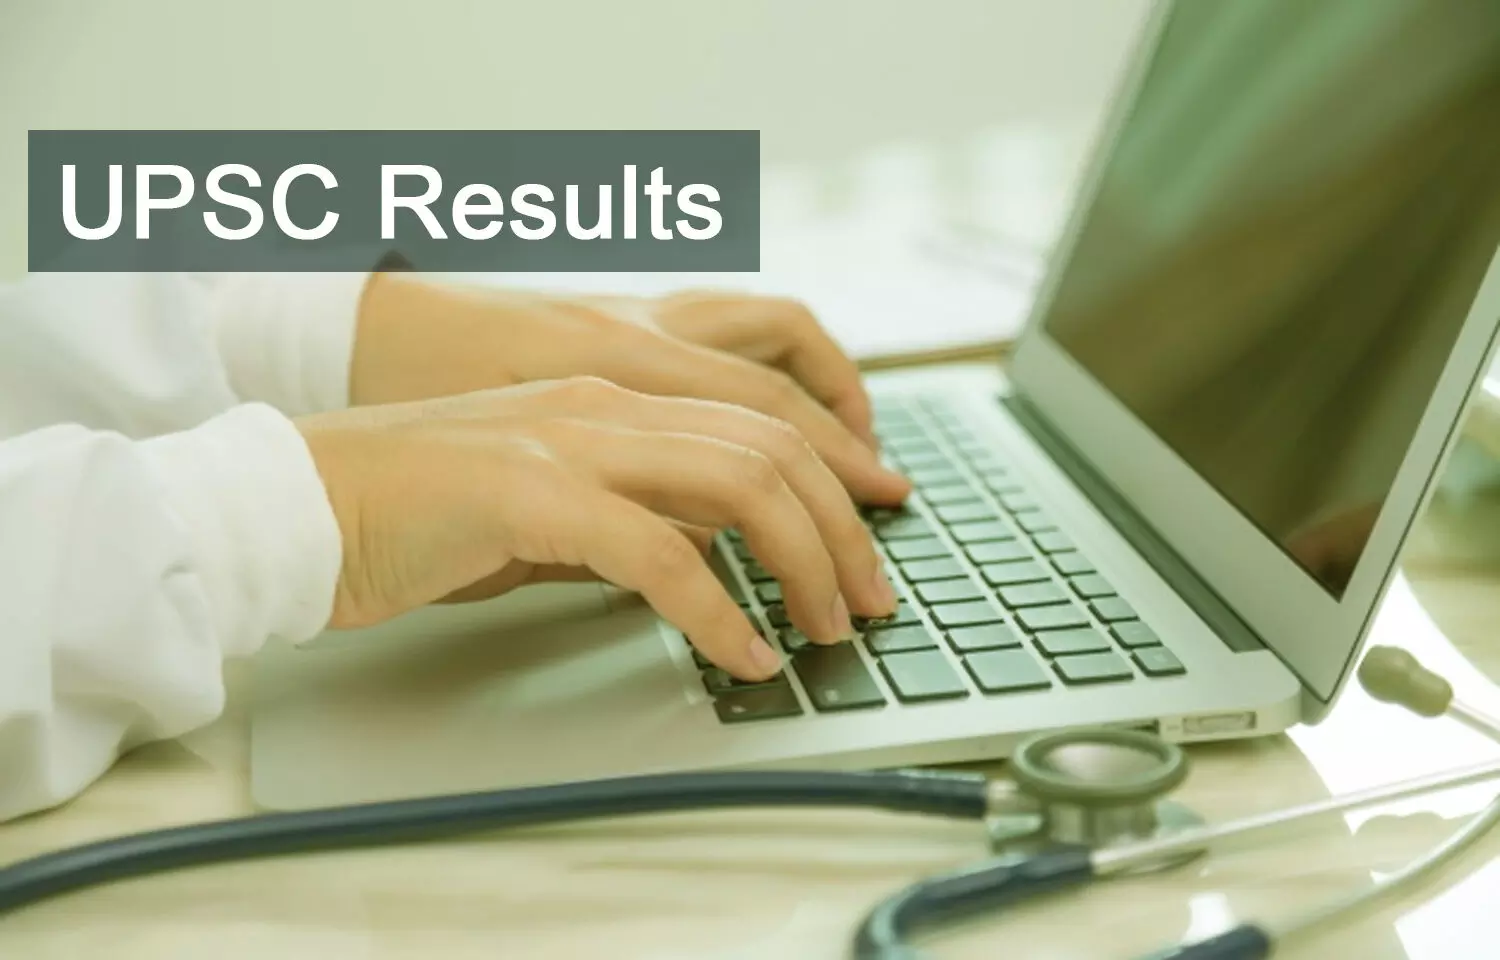 UPSC Combined Medical Services Examination 2020 Results out, check now